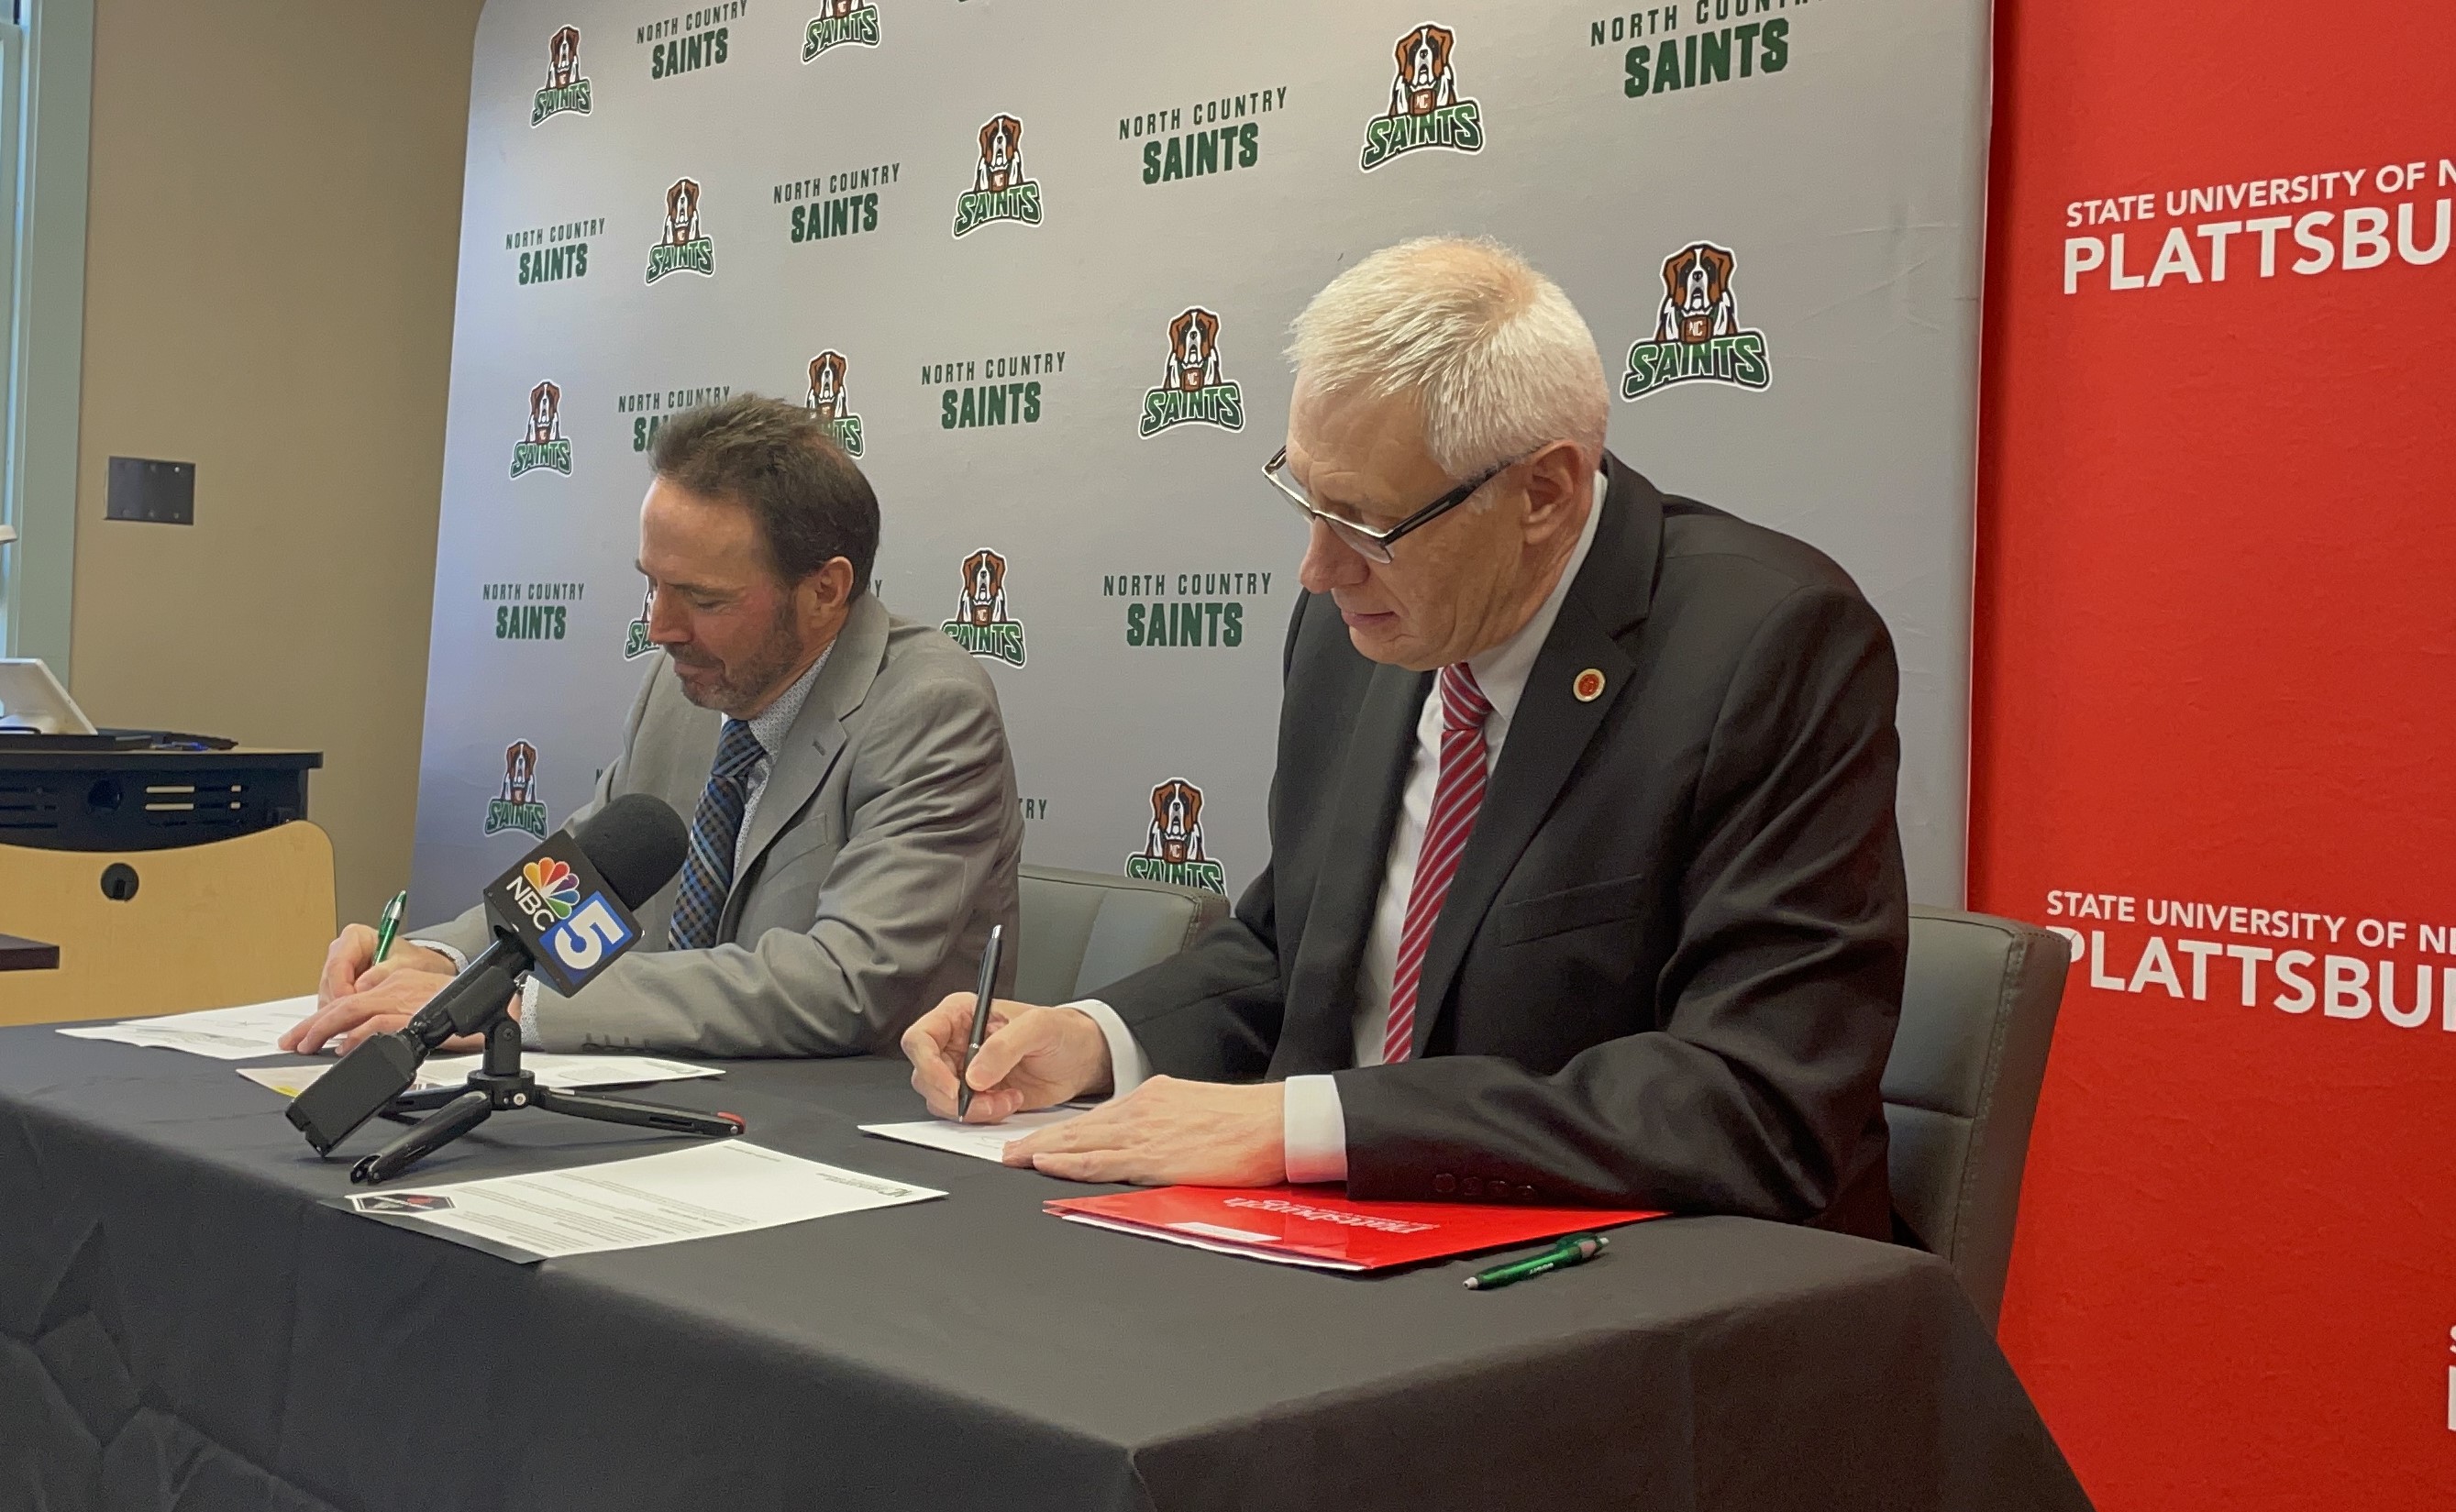 Two college officials sign documents at a table